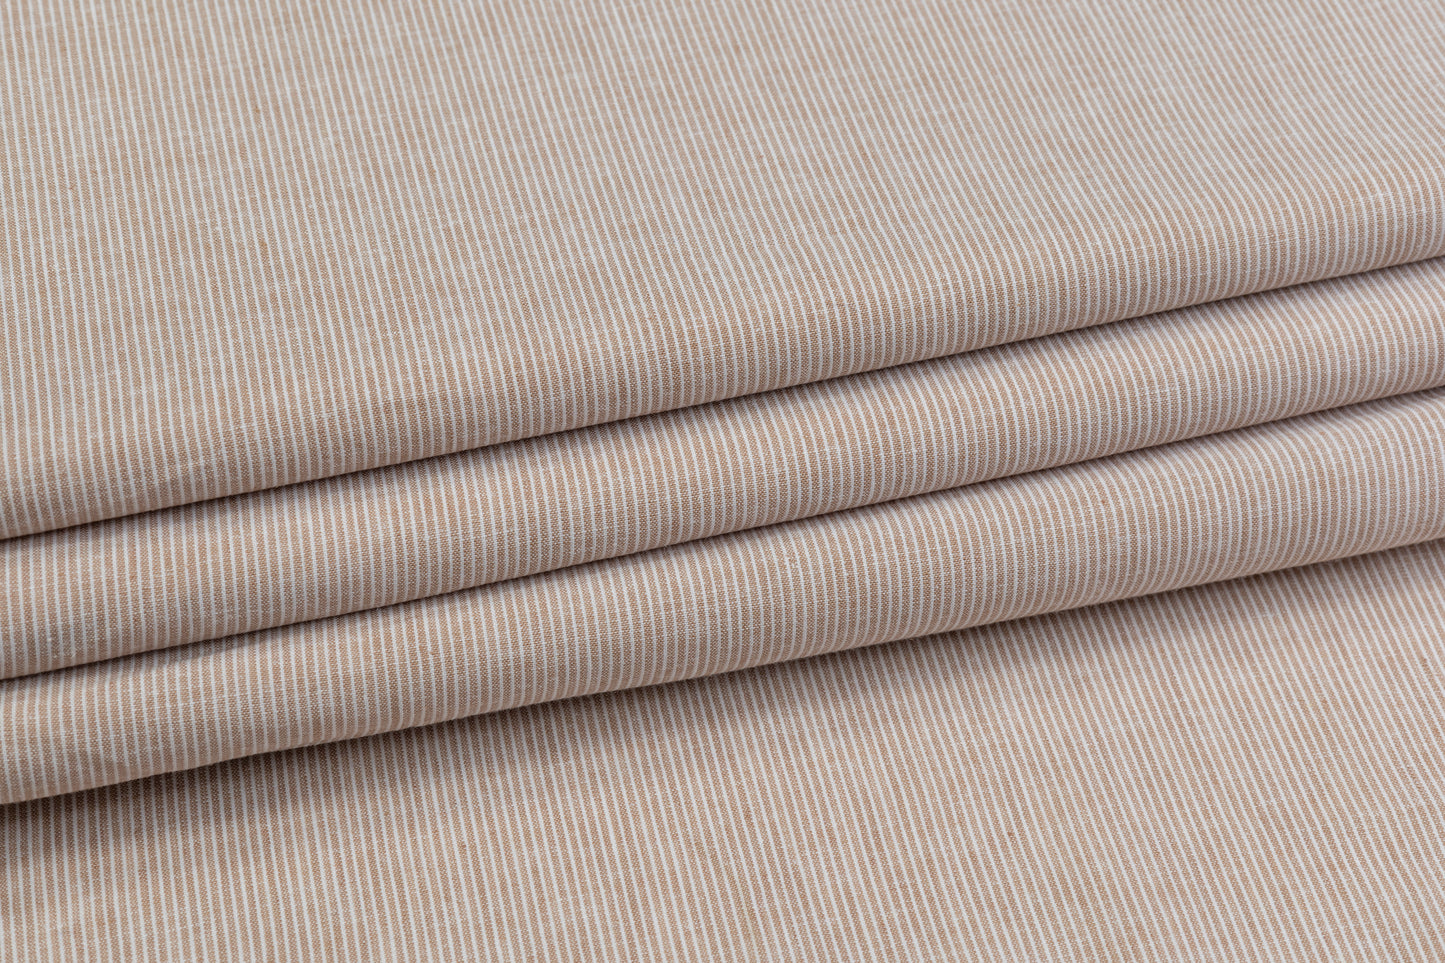 Hairline Striped Printed Italian Linen - Taupe / White